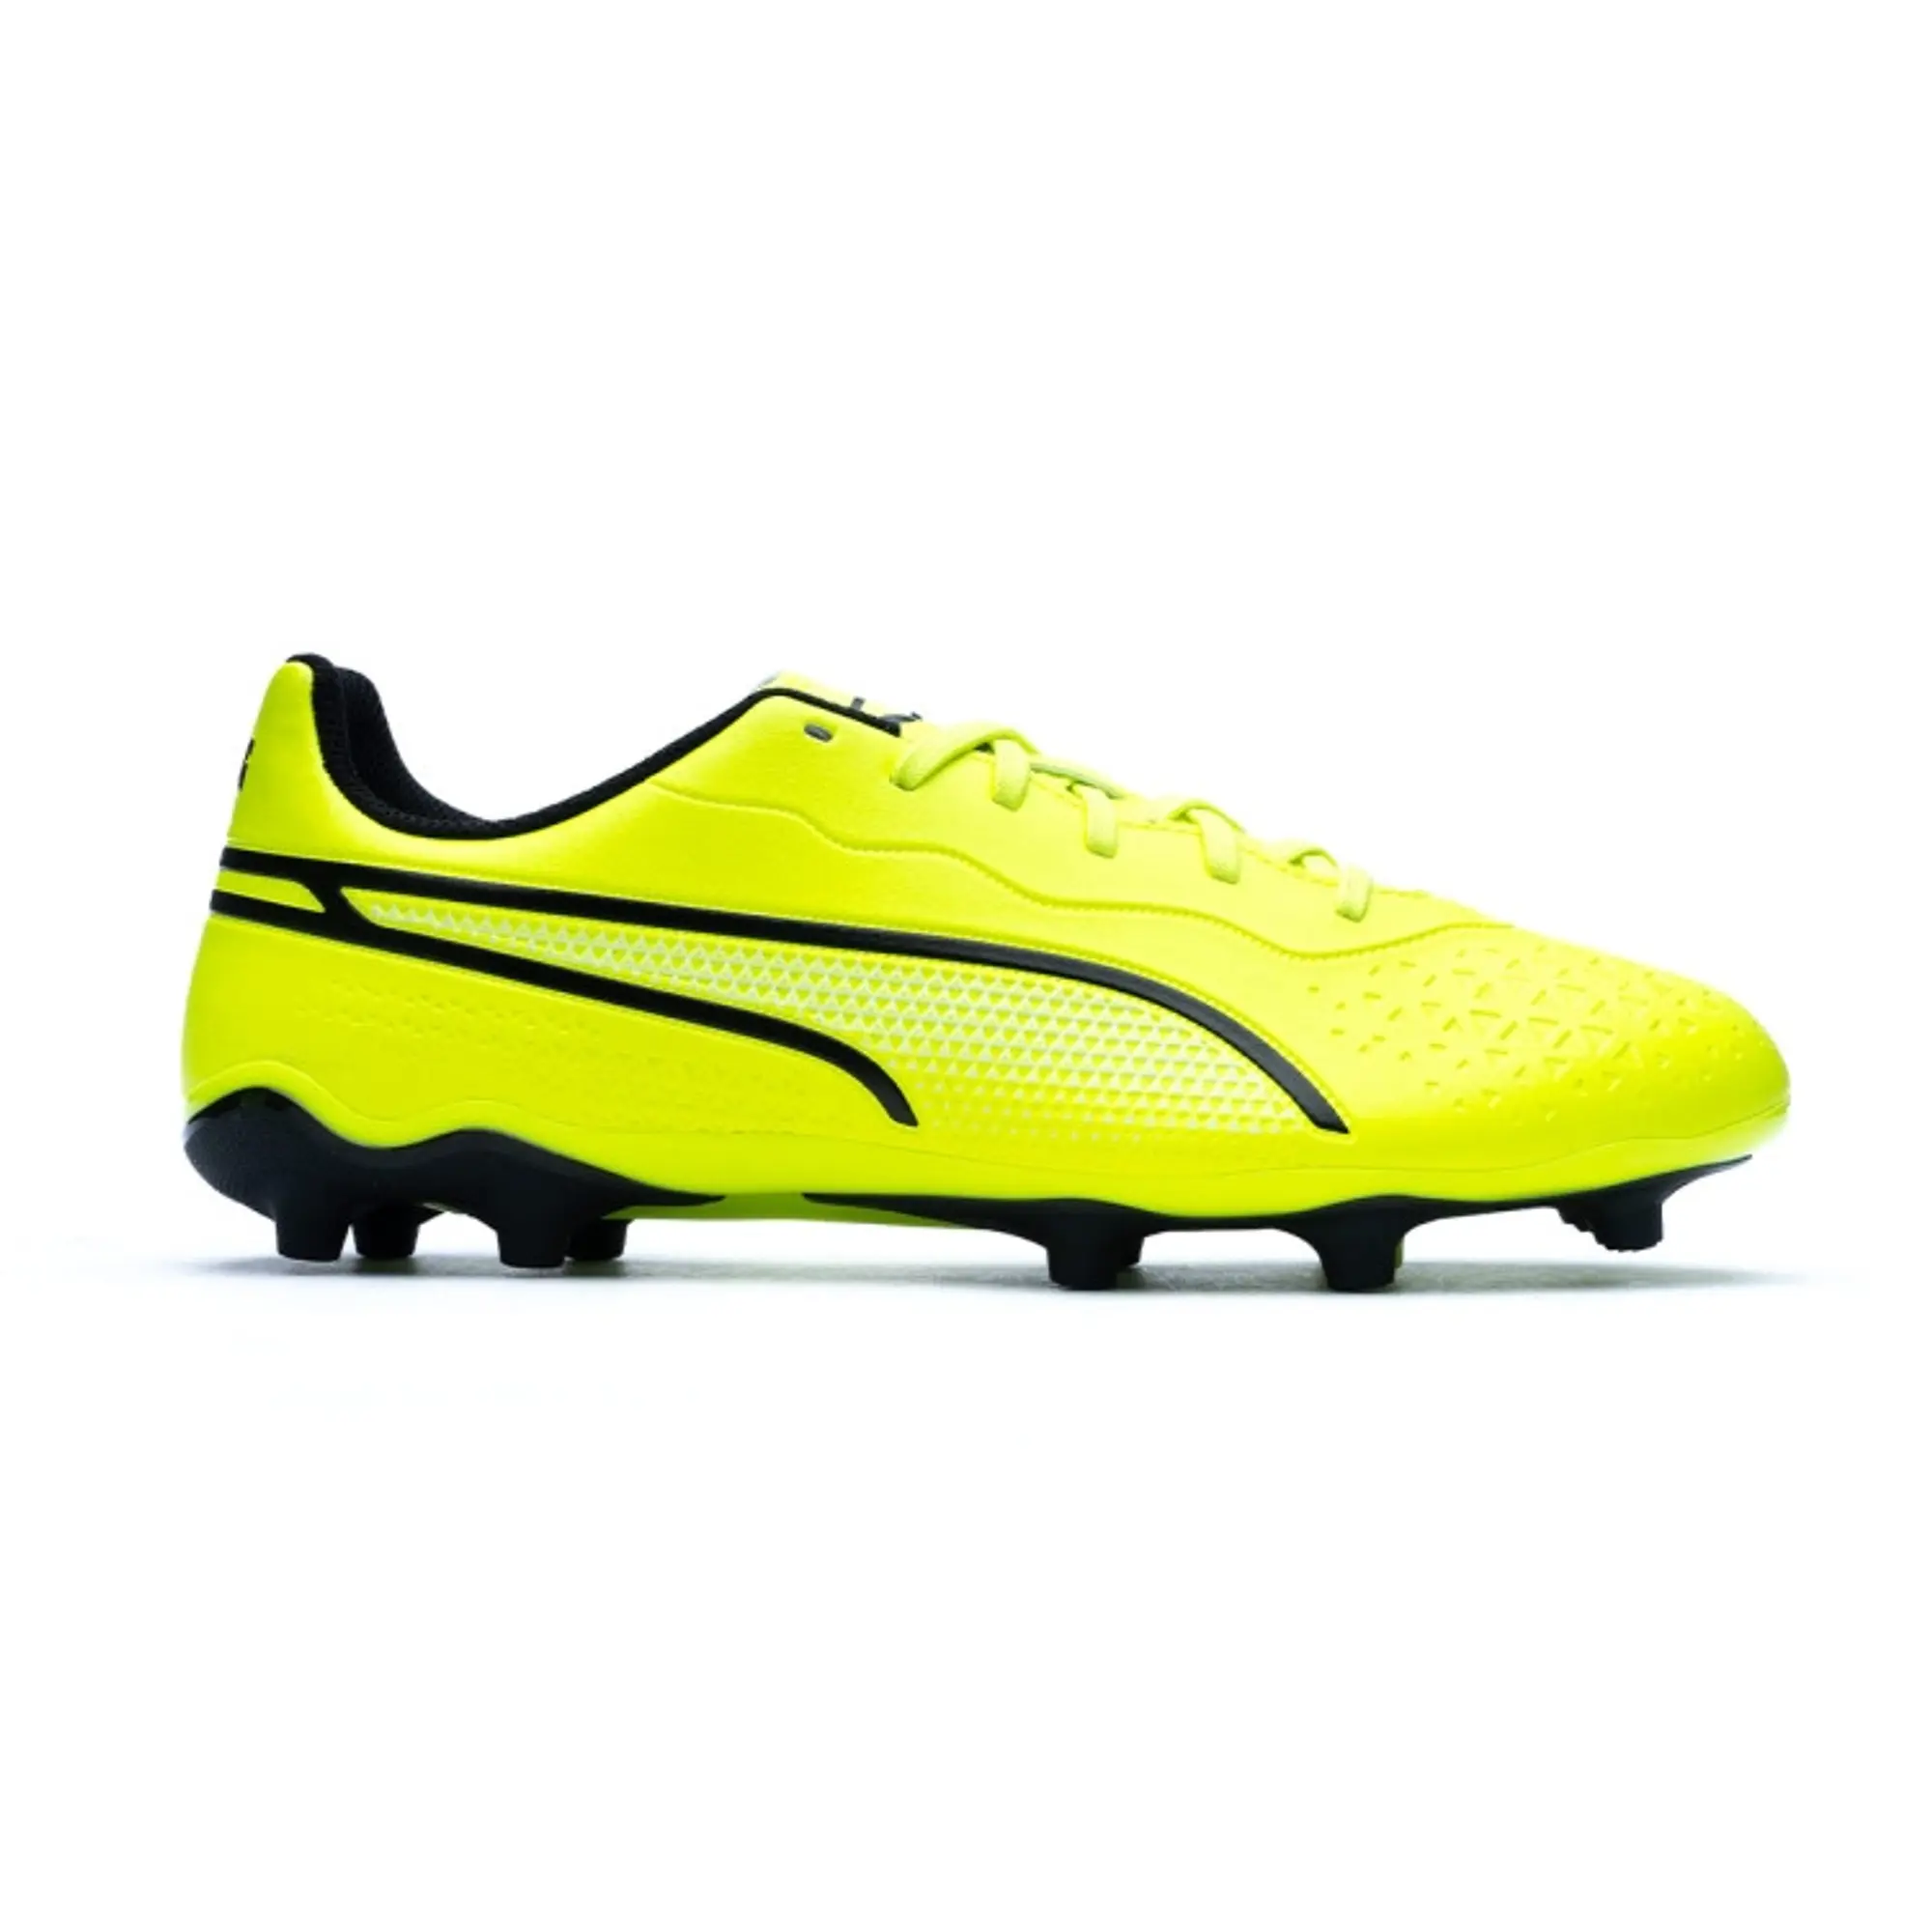 PUMA King Match FG/AG Youth Football Boots, Electric Lime/Black/Poison Pink